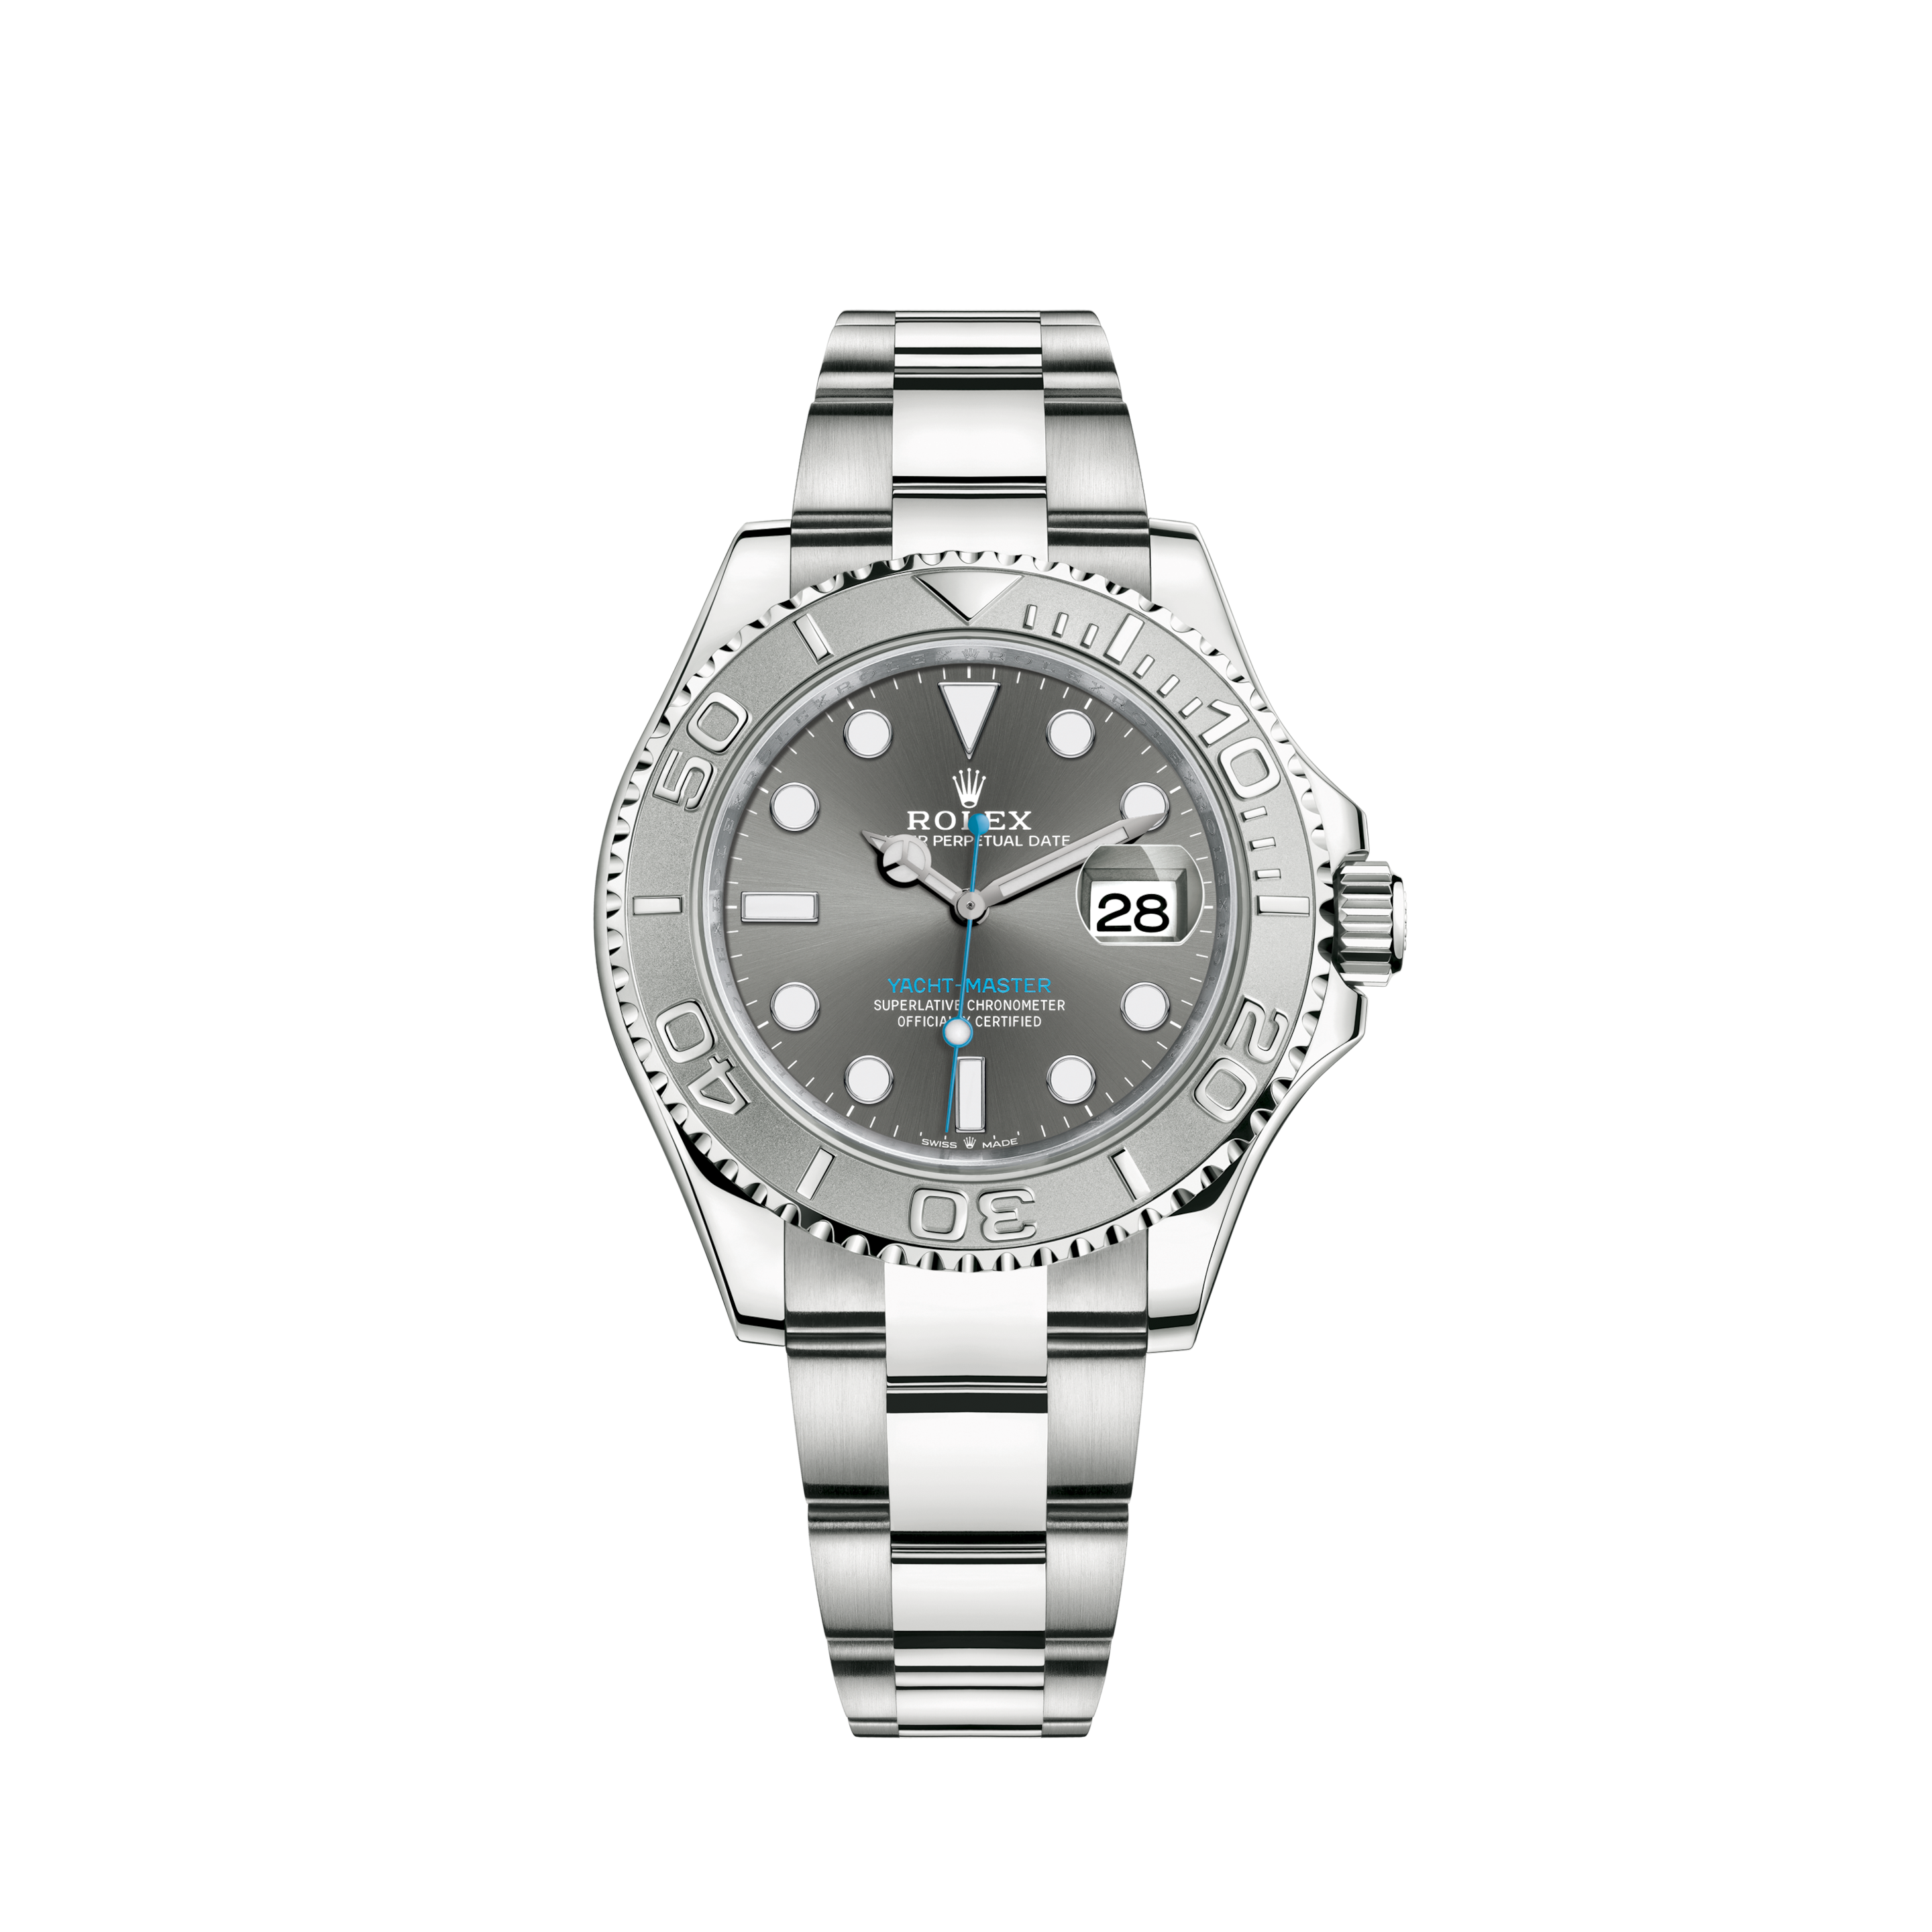 Rolex Oyster Perpetual Datejust Diamond Bezel & Grey Roman Numeral Dial 36mm Stainless Steel Watch